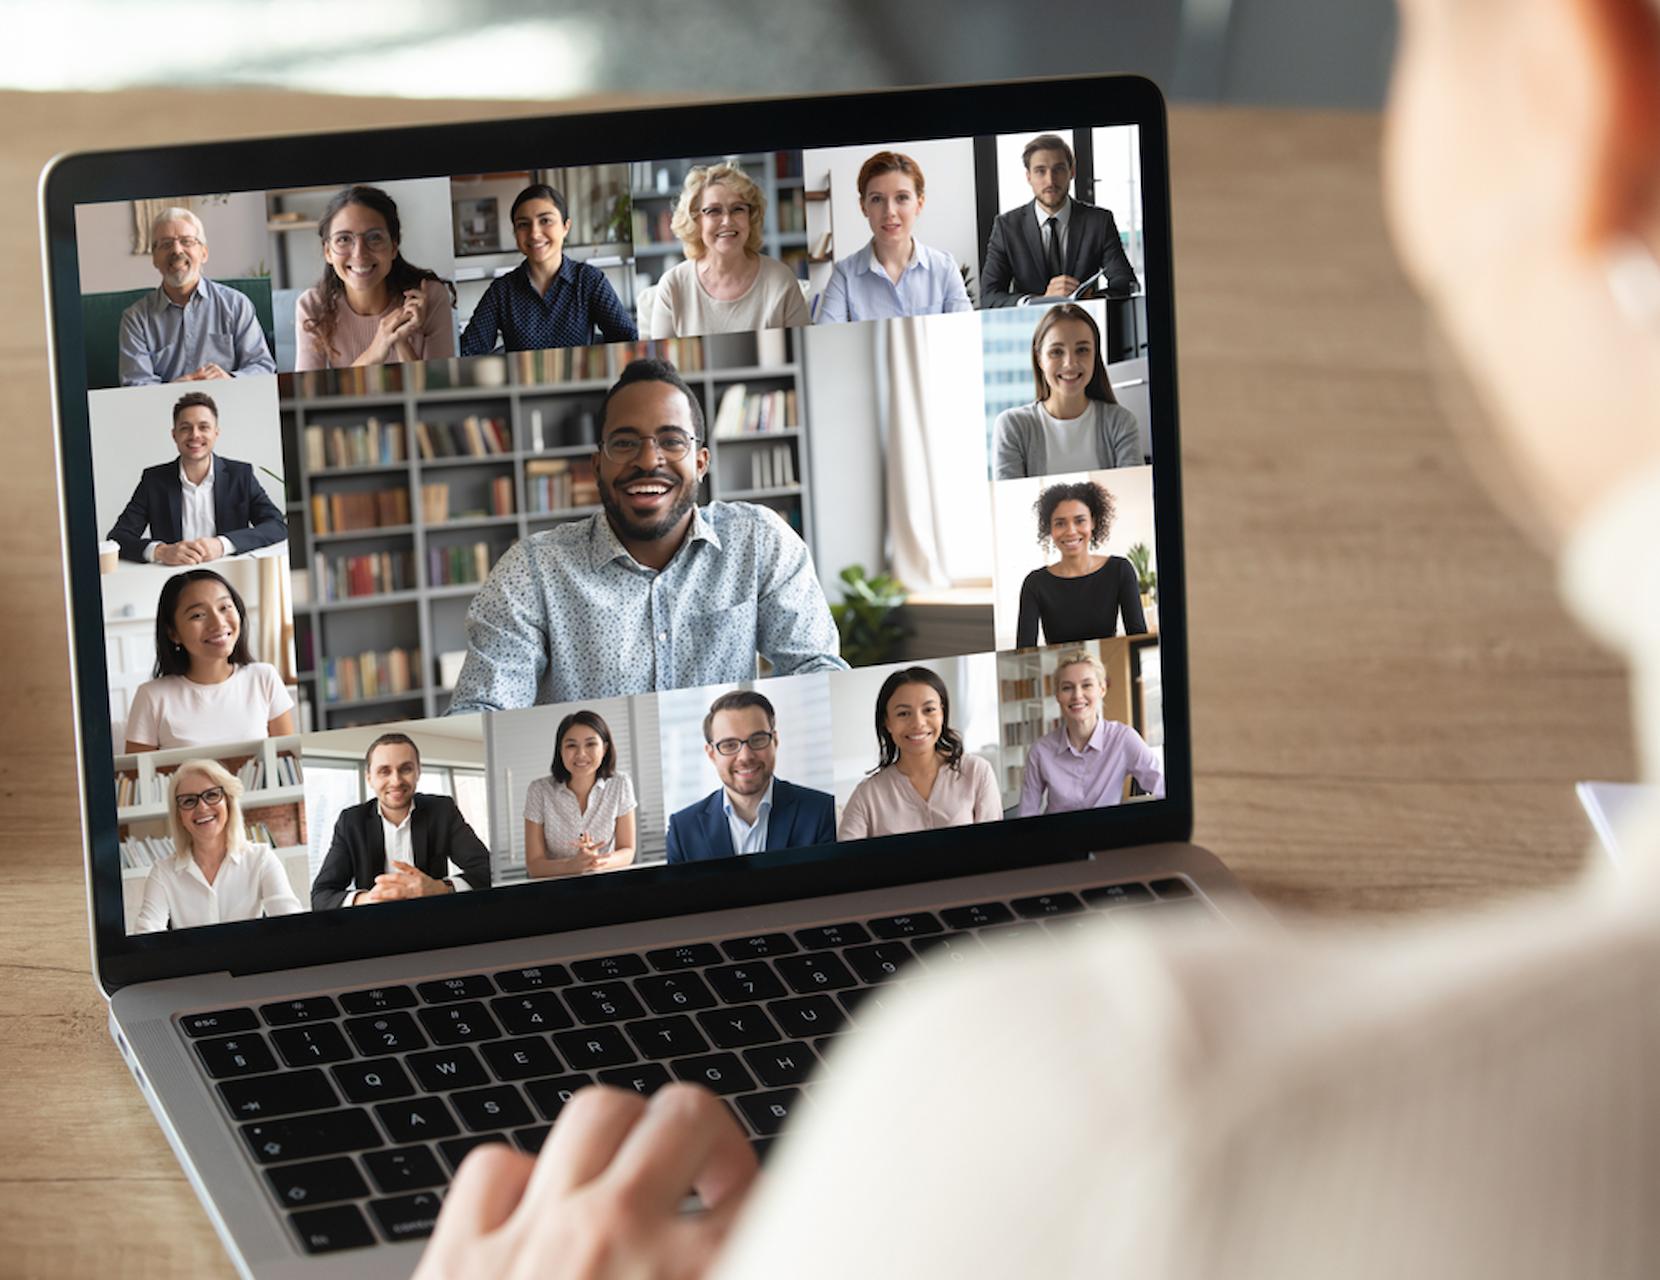 Why is Virtual Team Building So Much Important?